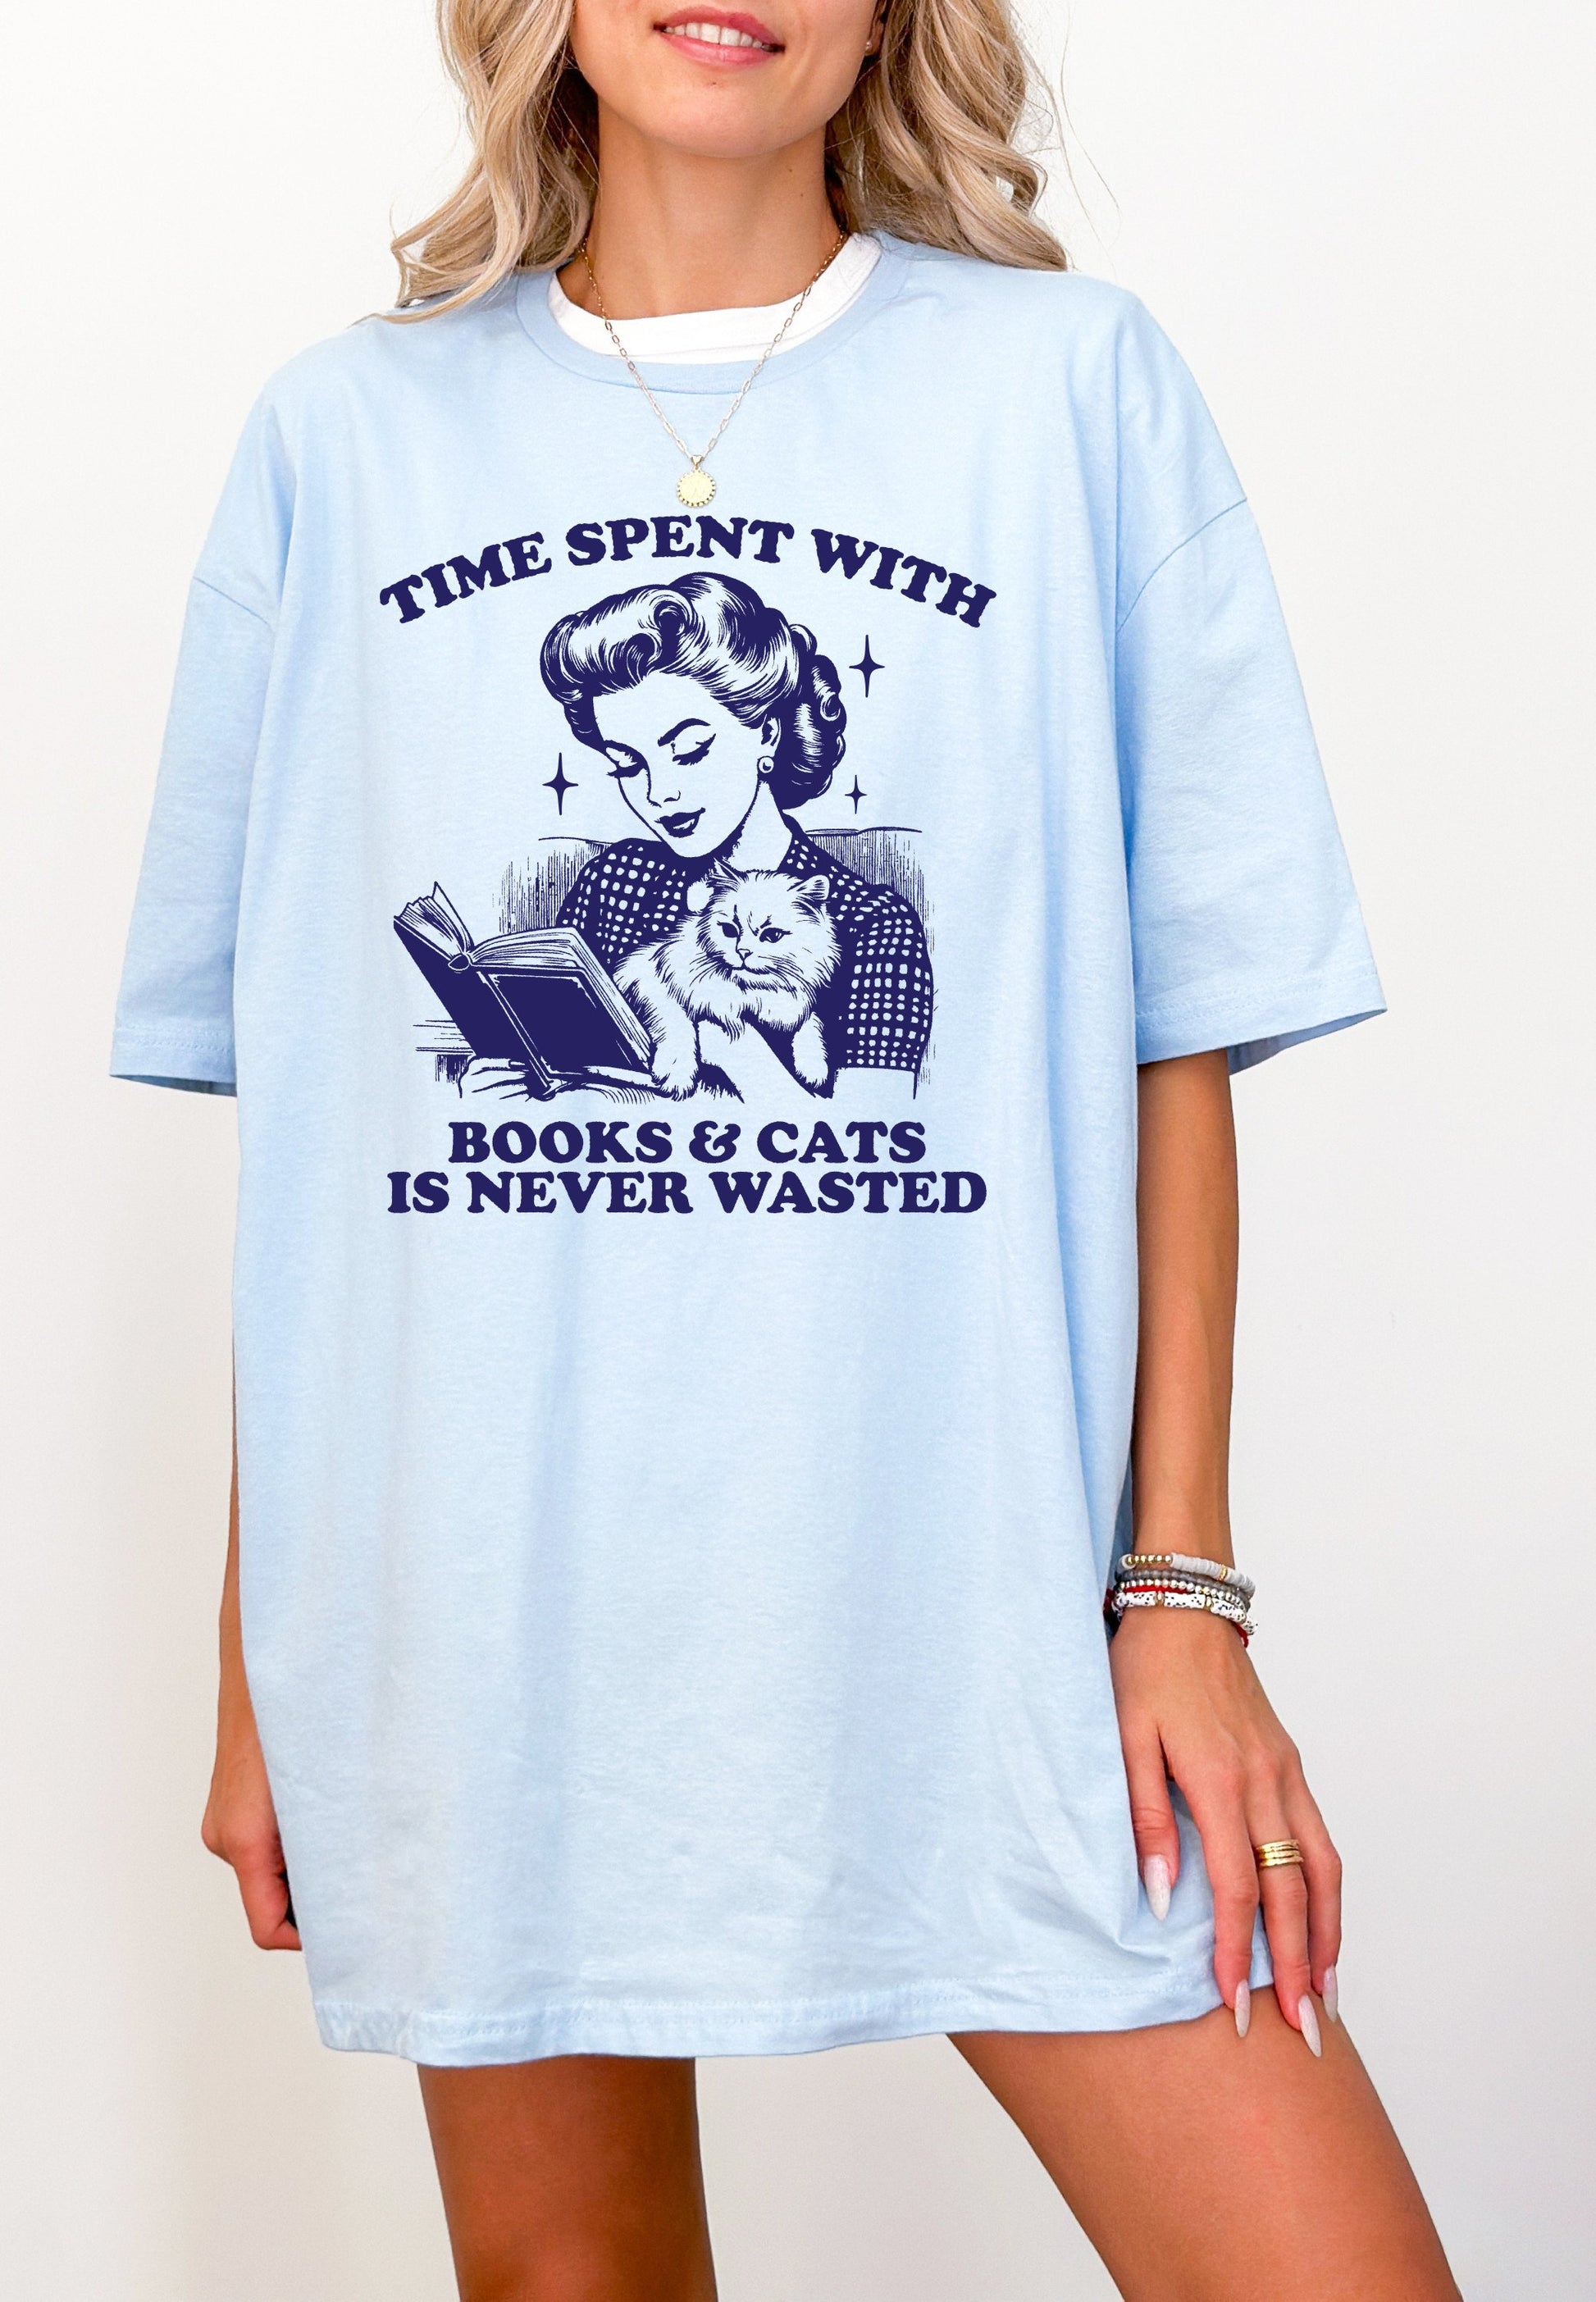 Time Spent with Books and Cats in Never Wasted Shirt Book shirt Book Lover TShirt Book Club Shirt Book Gift book Lover Gifts Reading Shirt